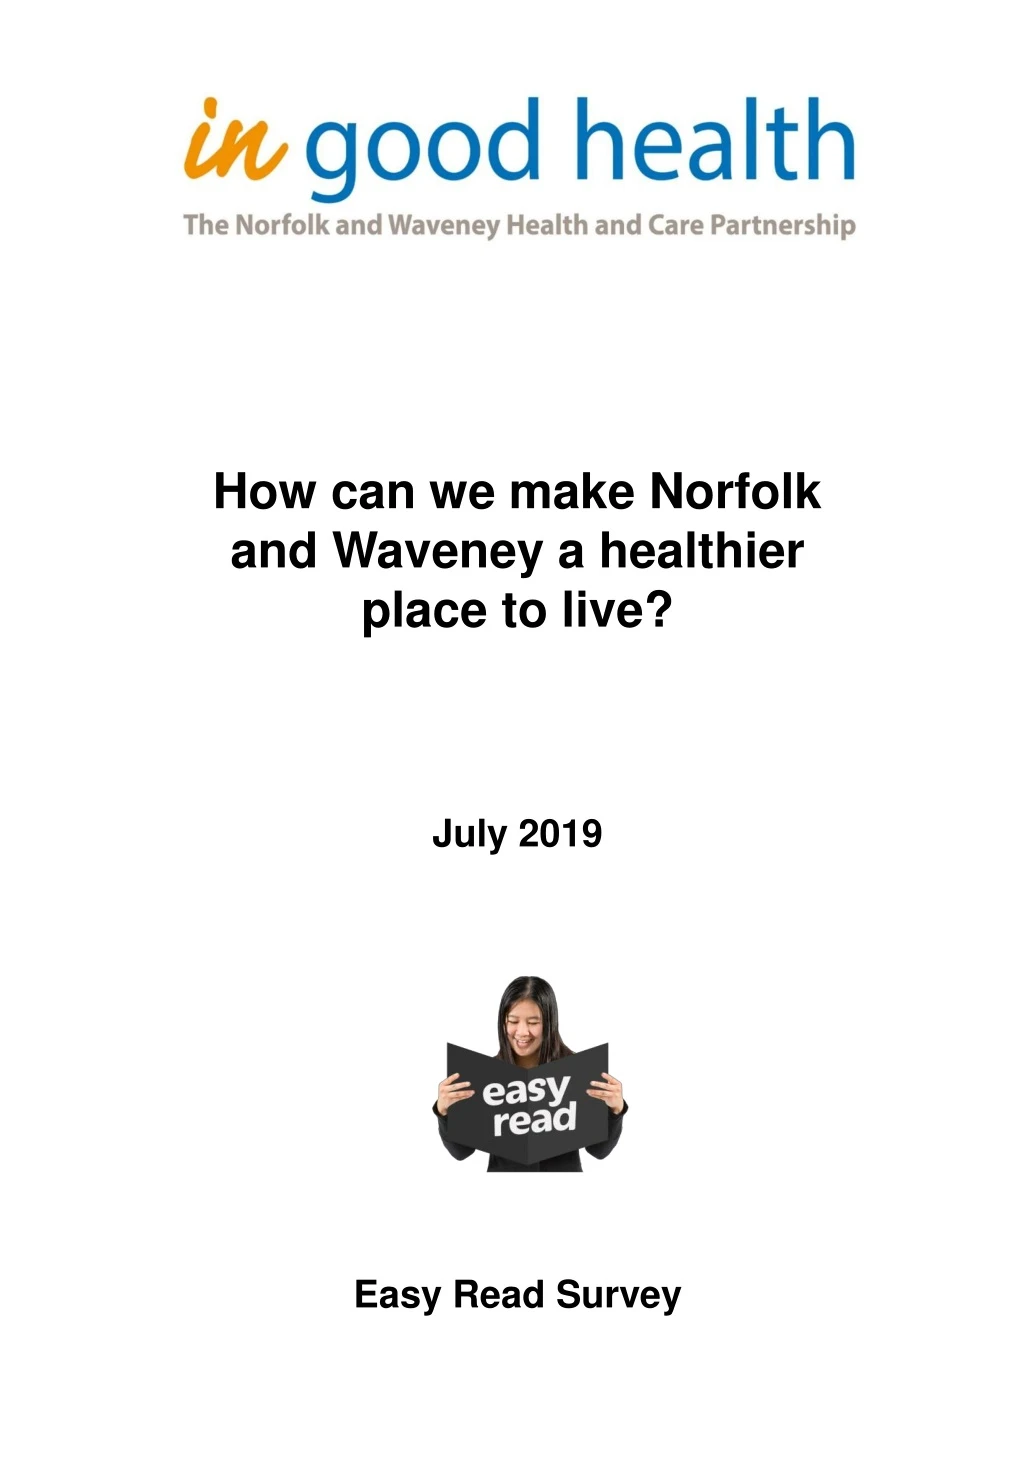 how can we make norfolk and waveney a healthier